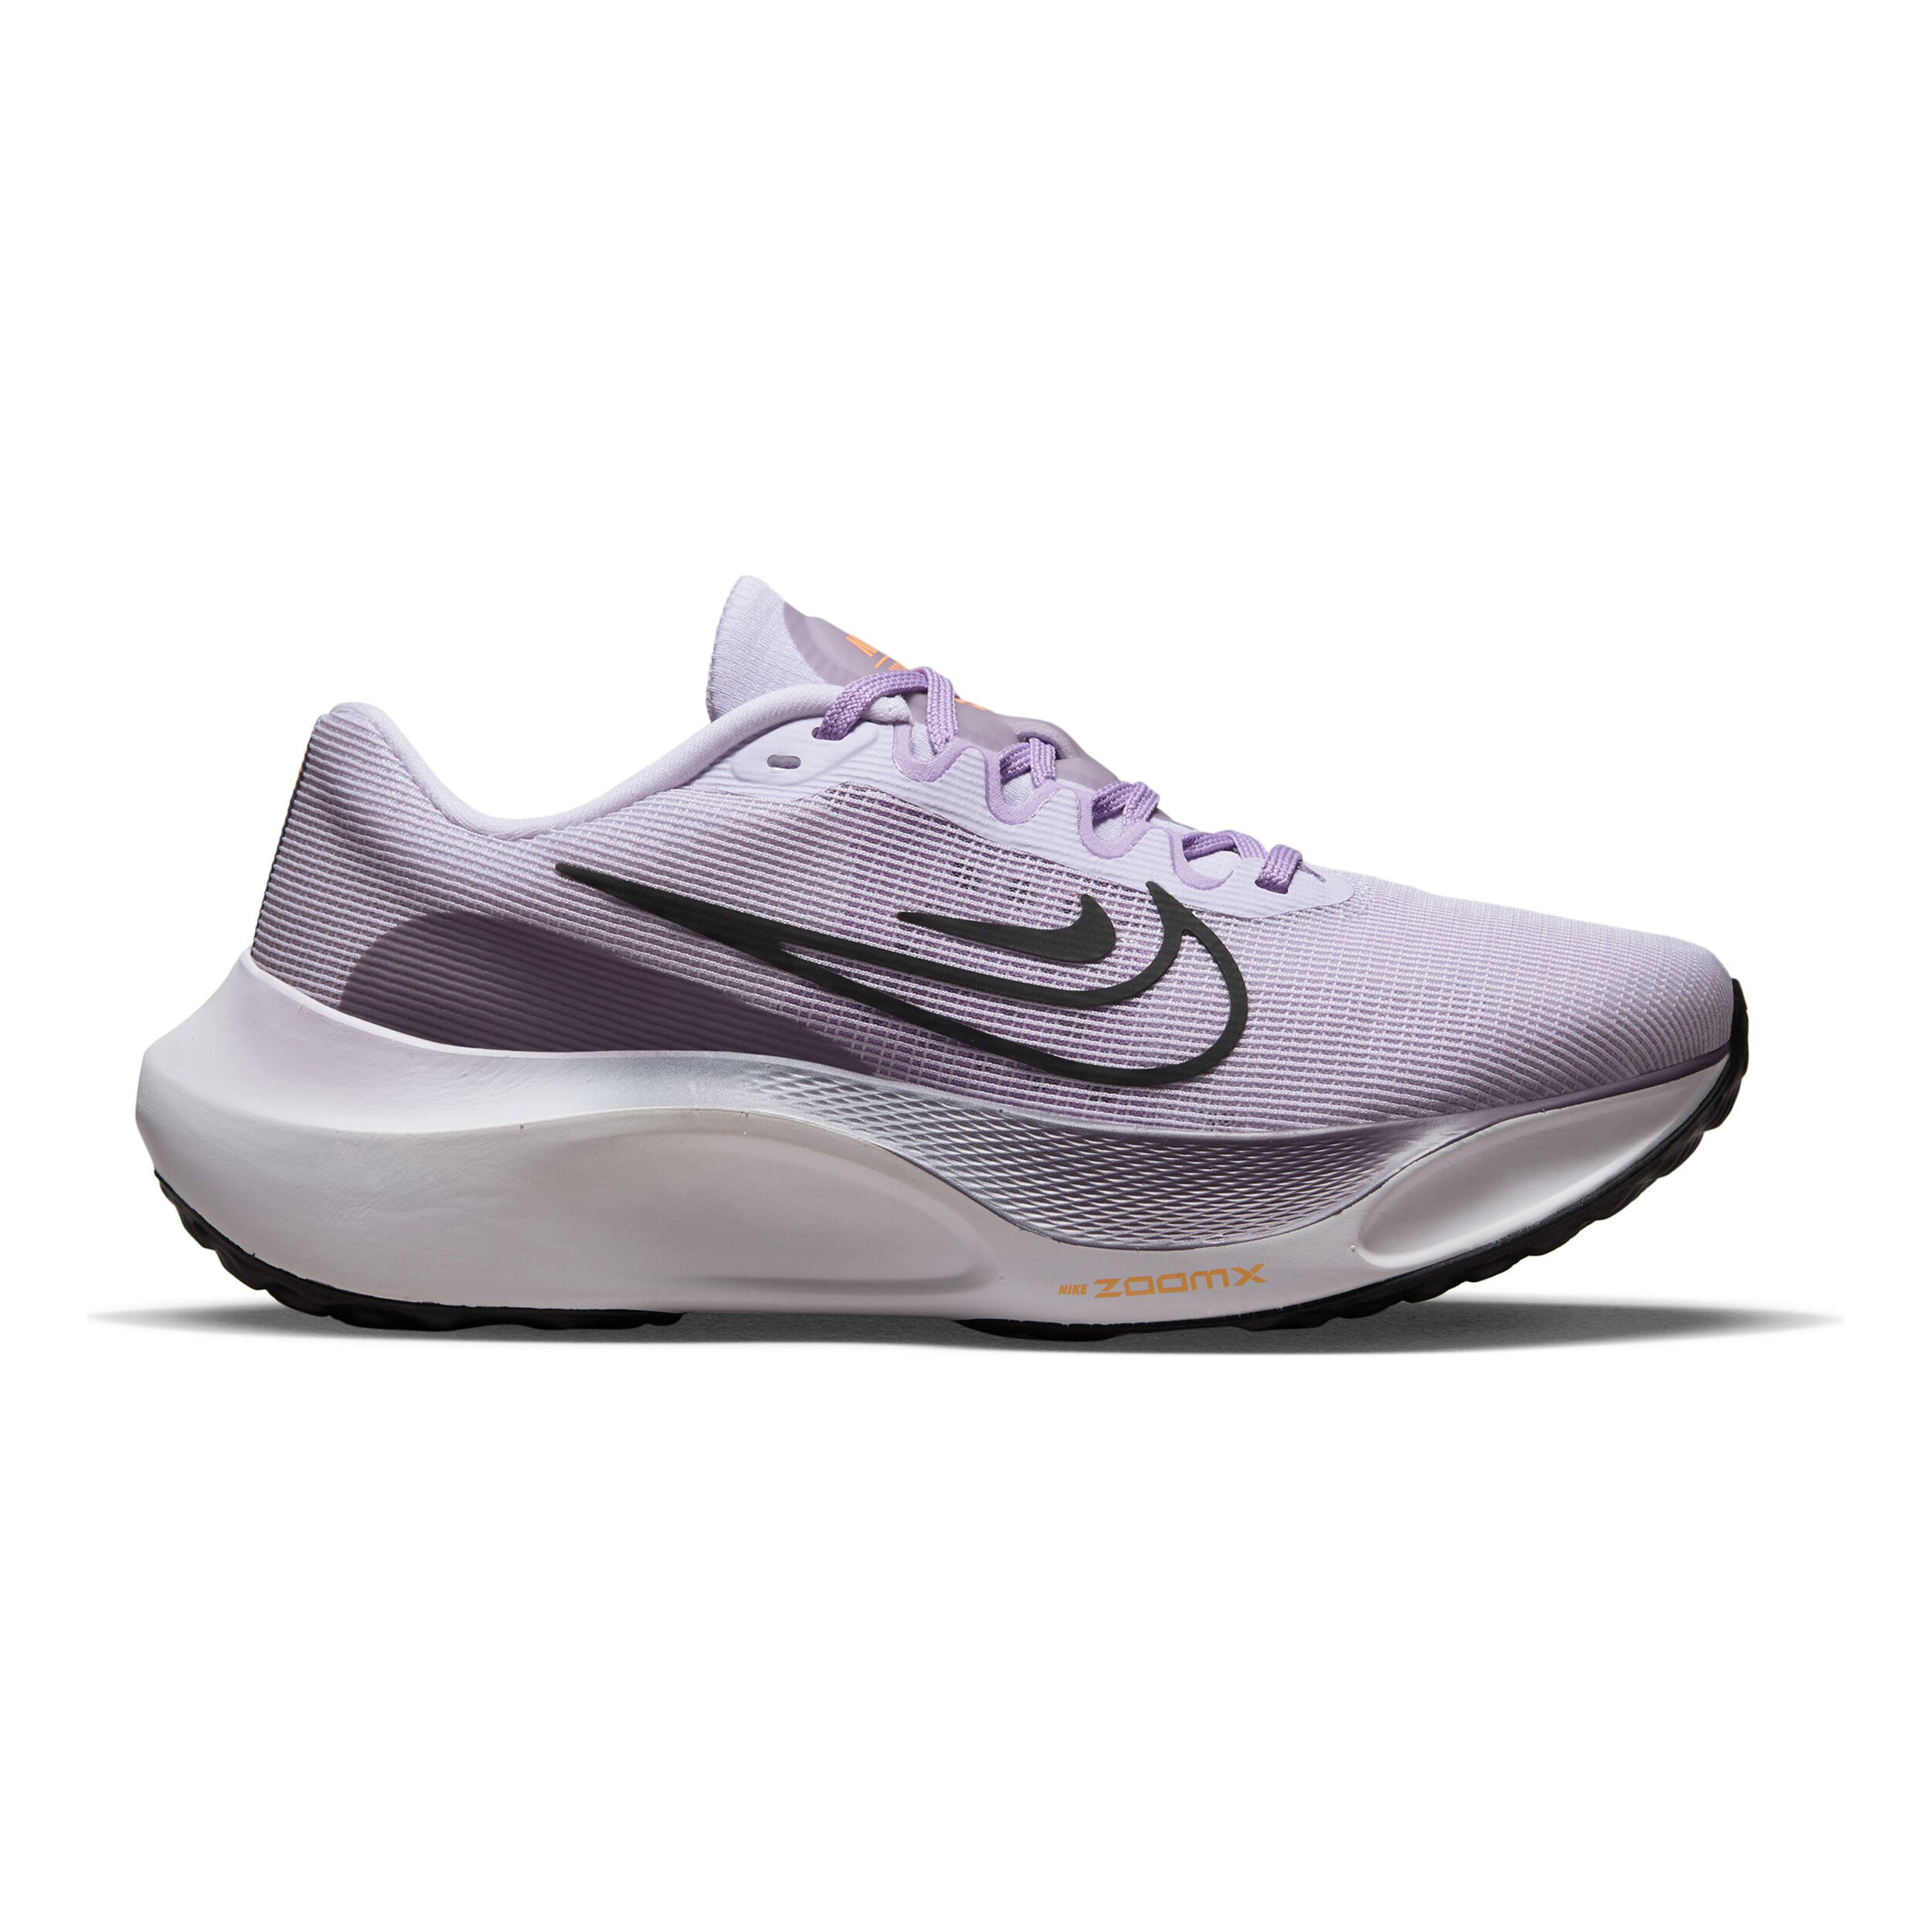 Buy Nike Zoom Fly 5 Competition Running Shoe Women Lilac, Black